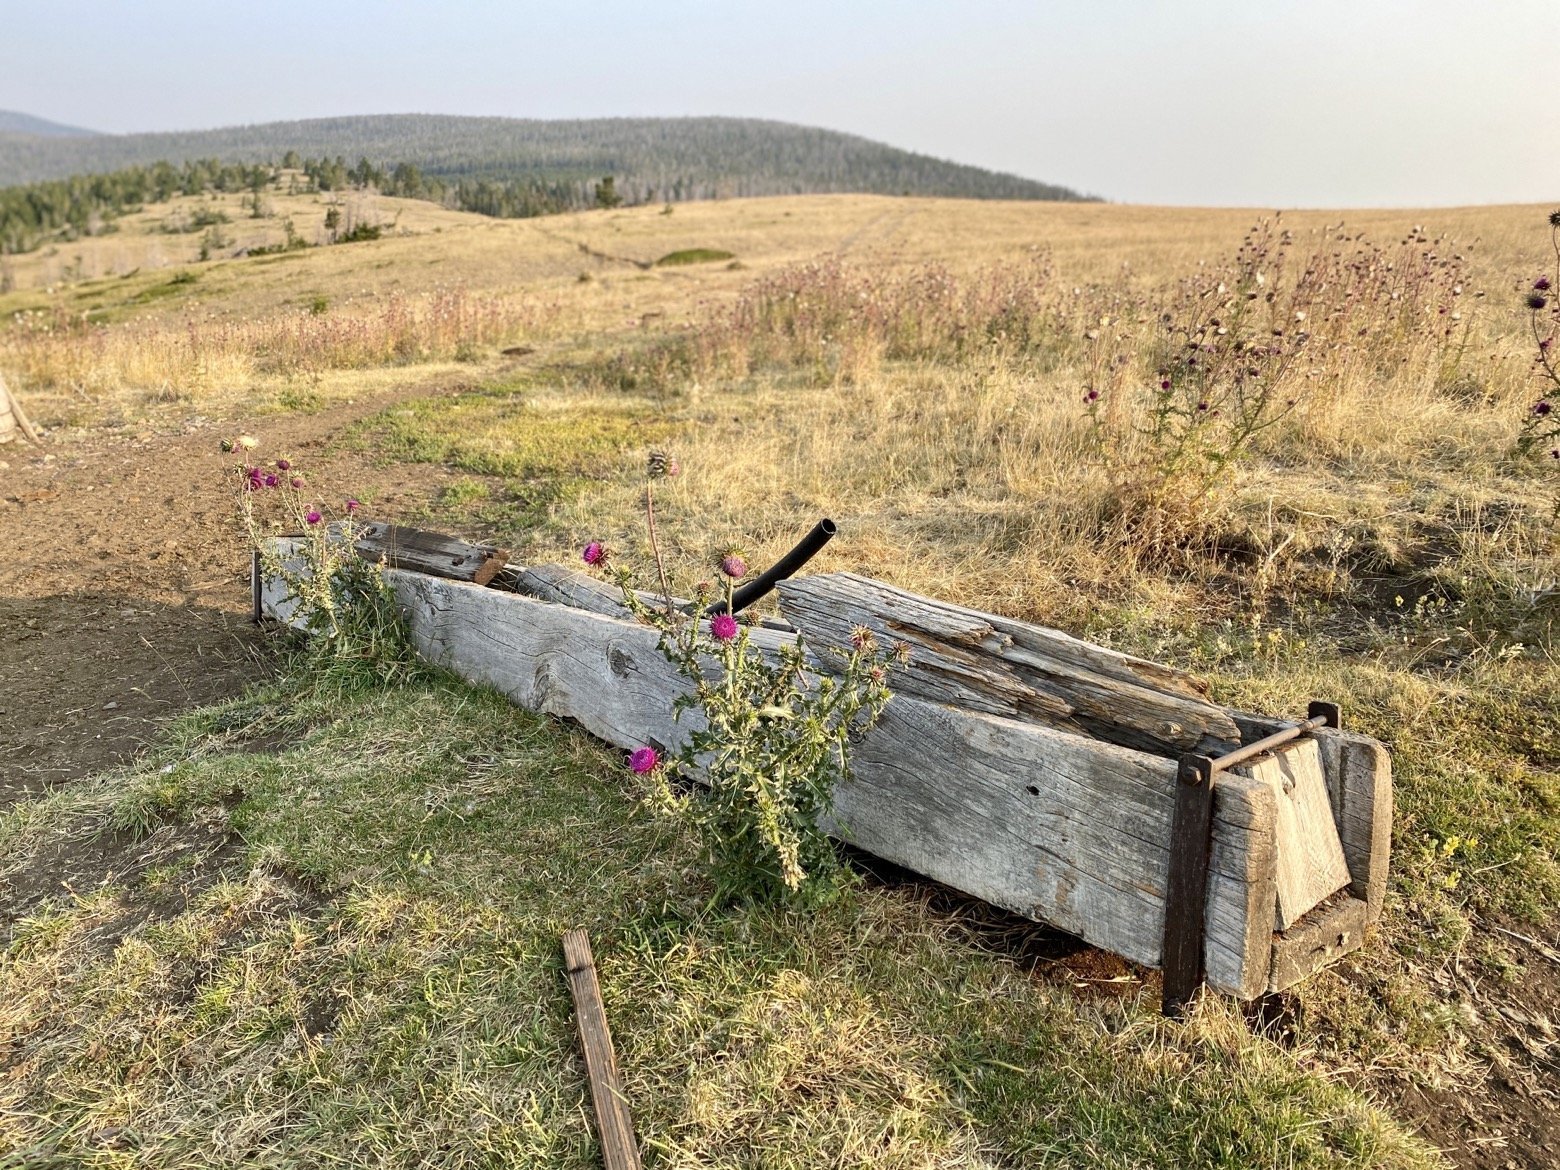 An old trough adorned with thistles